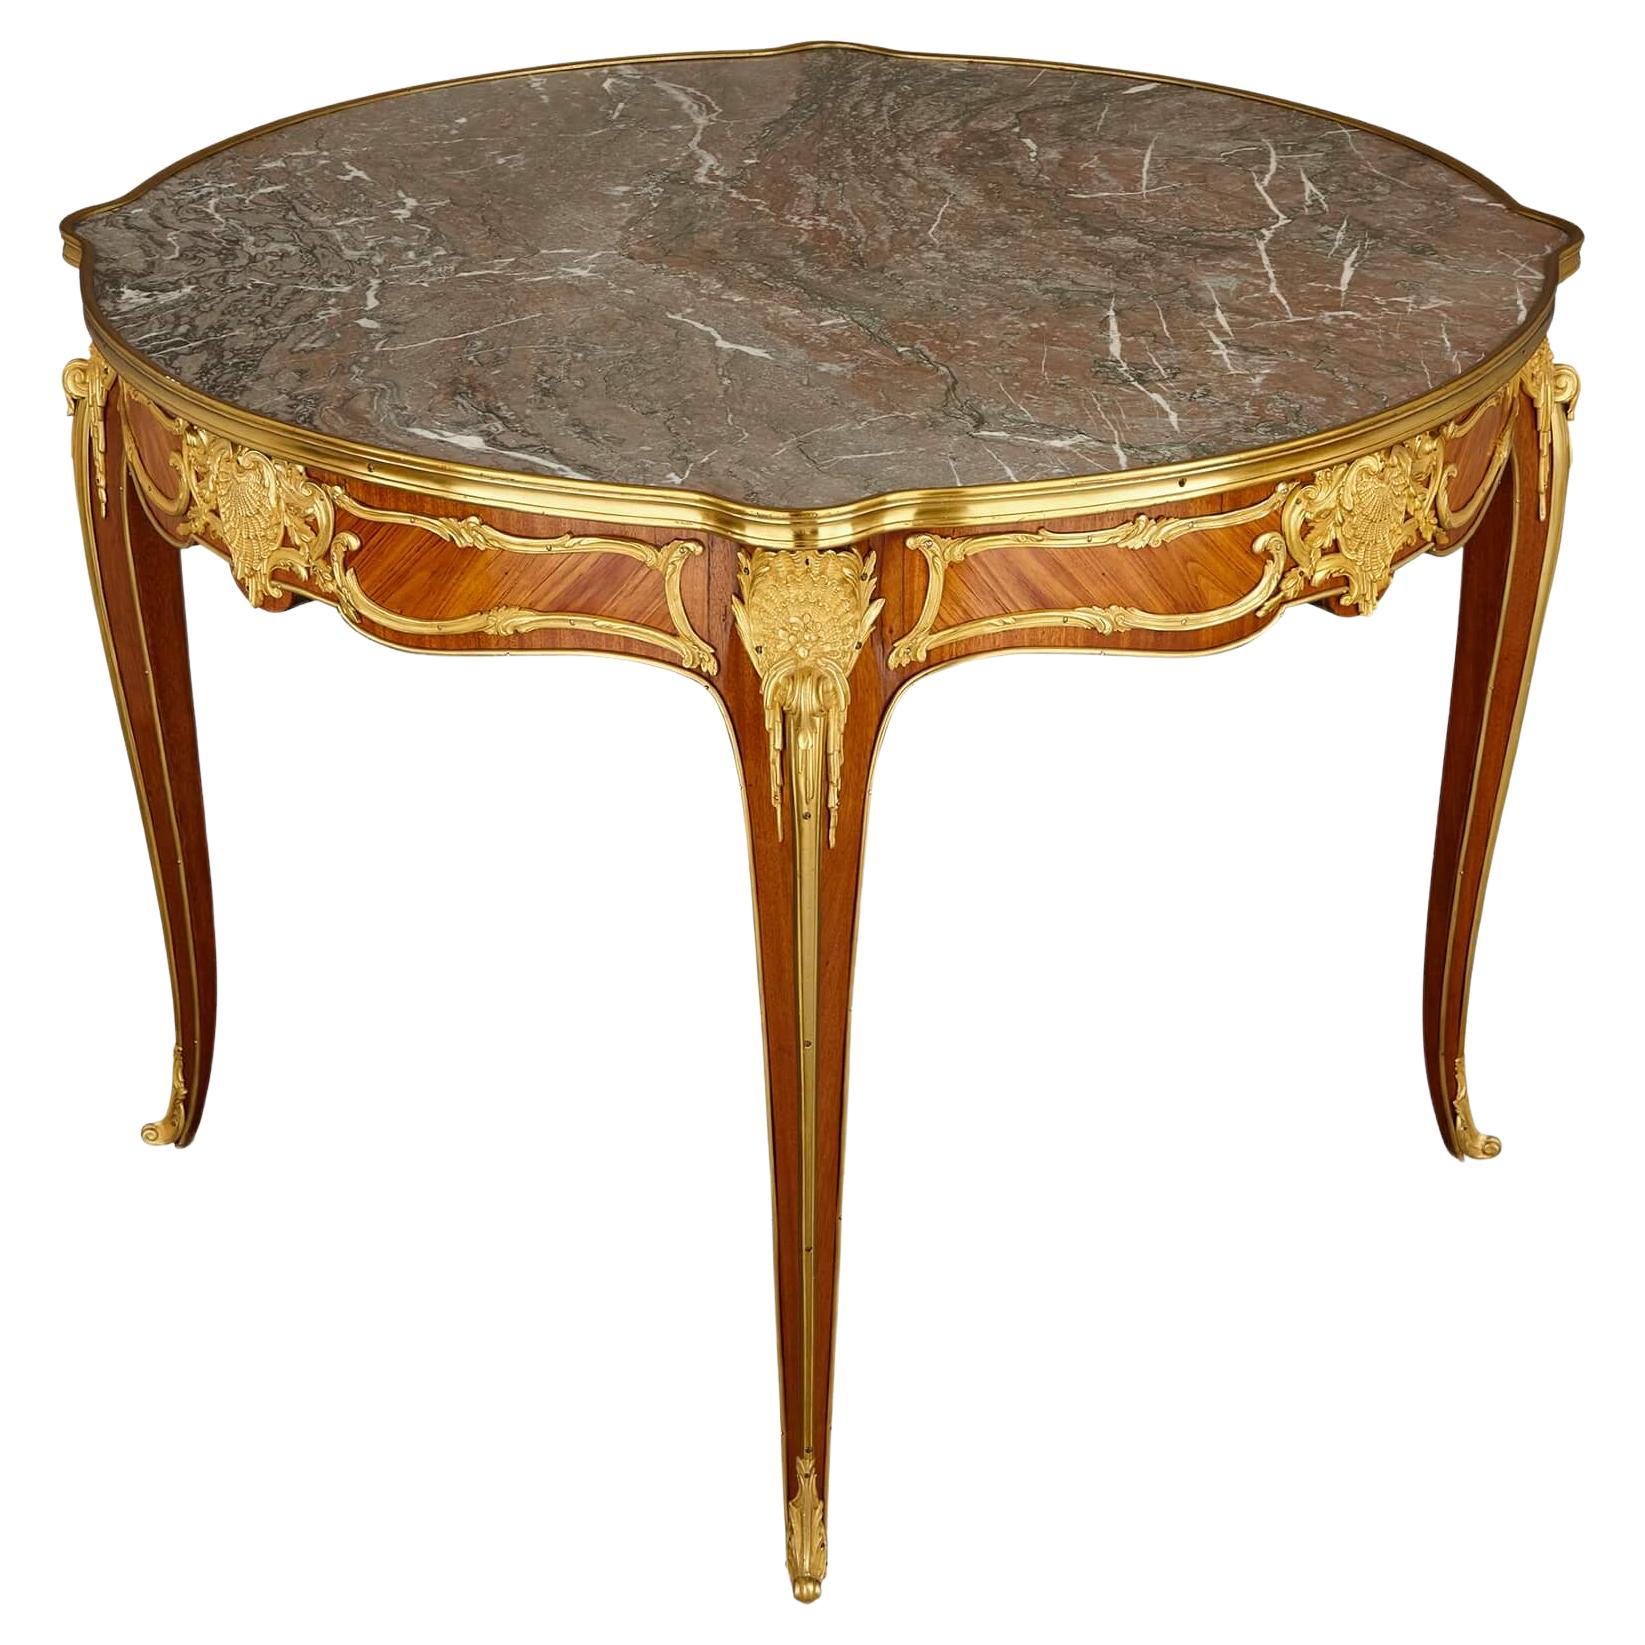 Antique Rococo Style Rosewood, Ormolu and Marble Centre Table For Sale